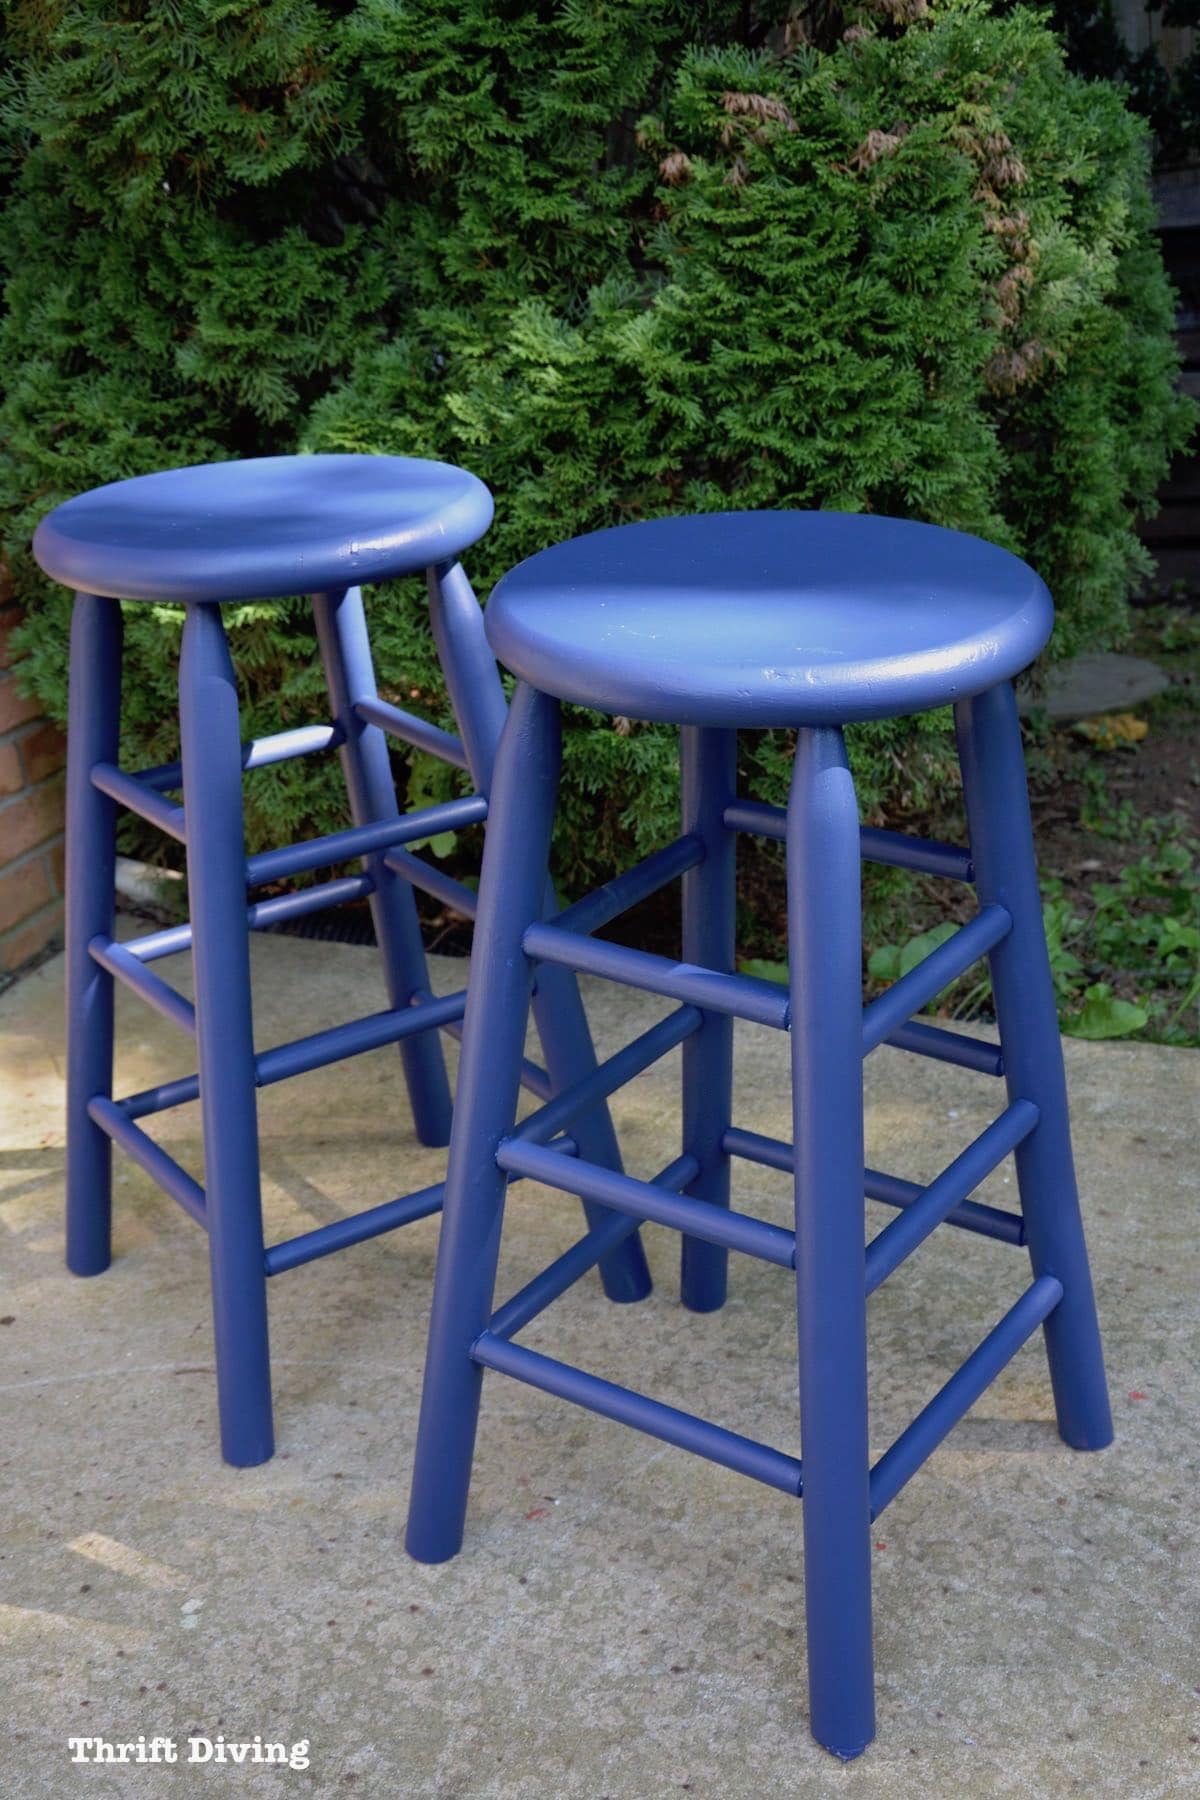 BEFORE & AFTER: Can you refinish barstools? Yes, with a beautiful Navy blue paint for an eat-in kitchen table! | Thrift Diving Blog - See over 500 post and projects on the blog!